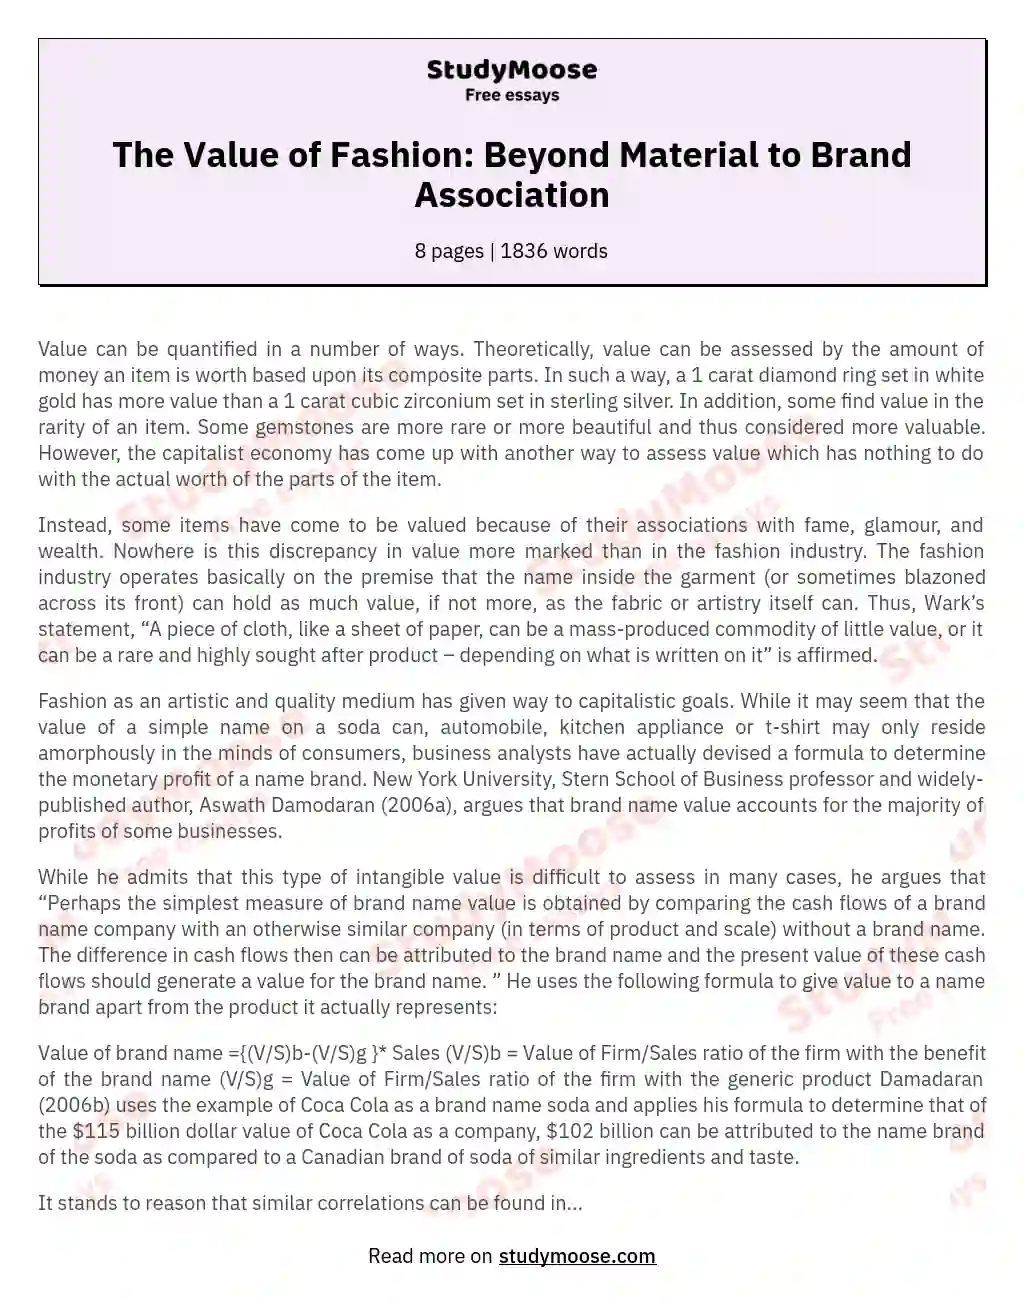 The Value of Fashion: Beyond Material to Brand Association essay